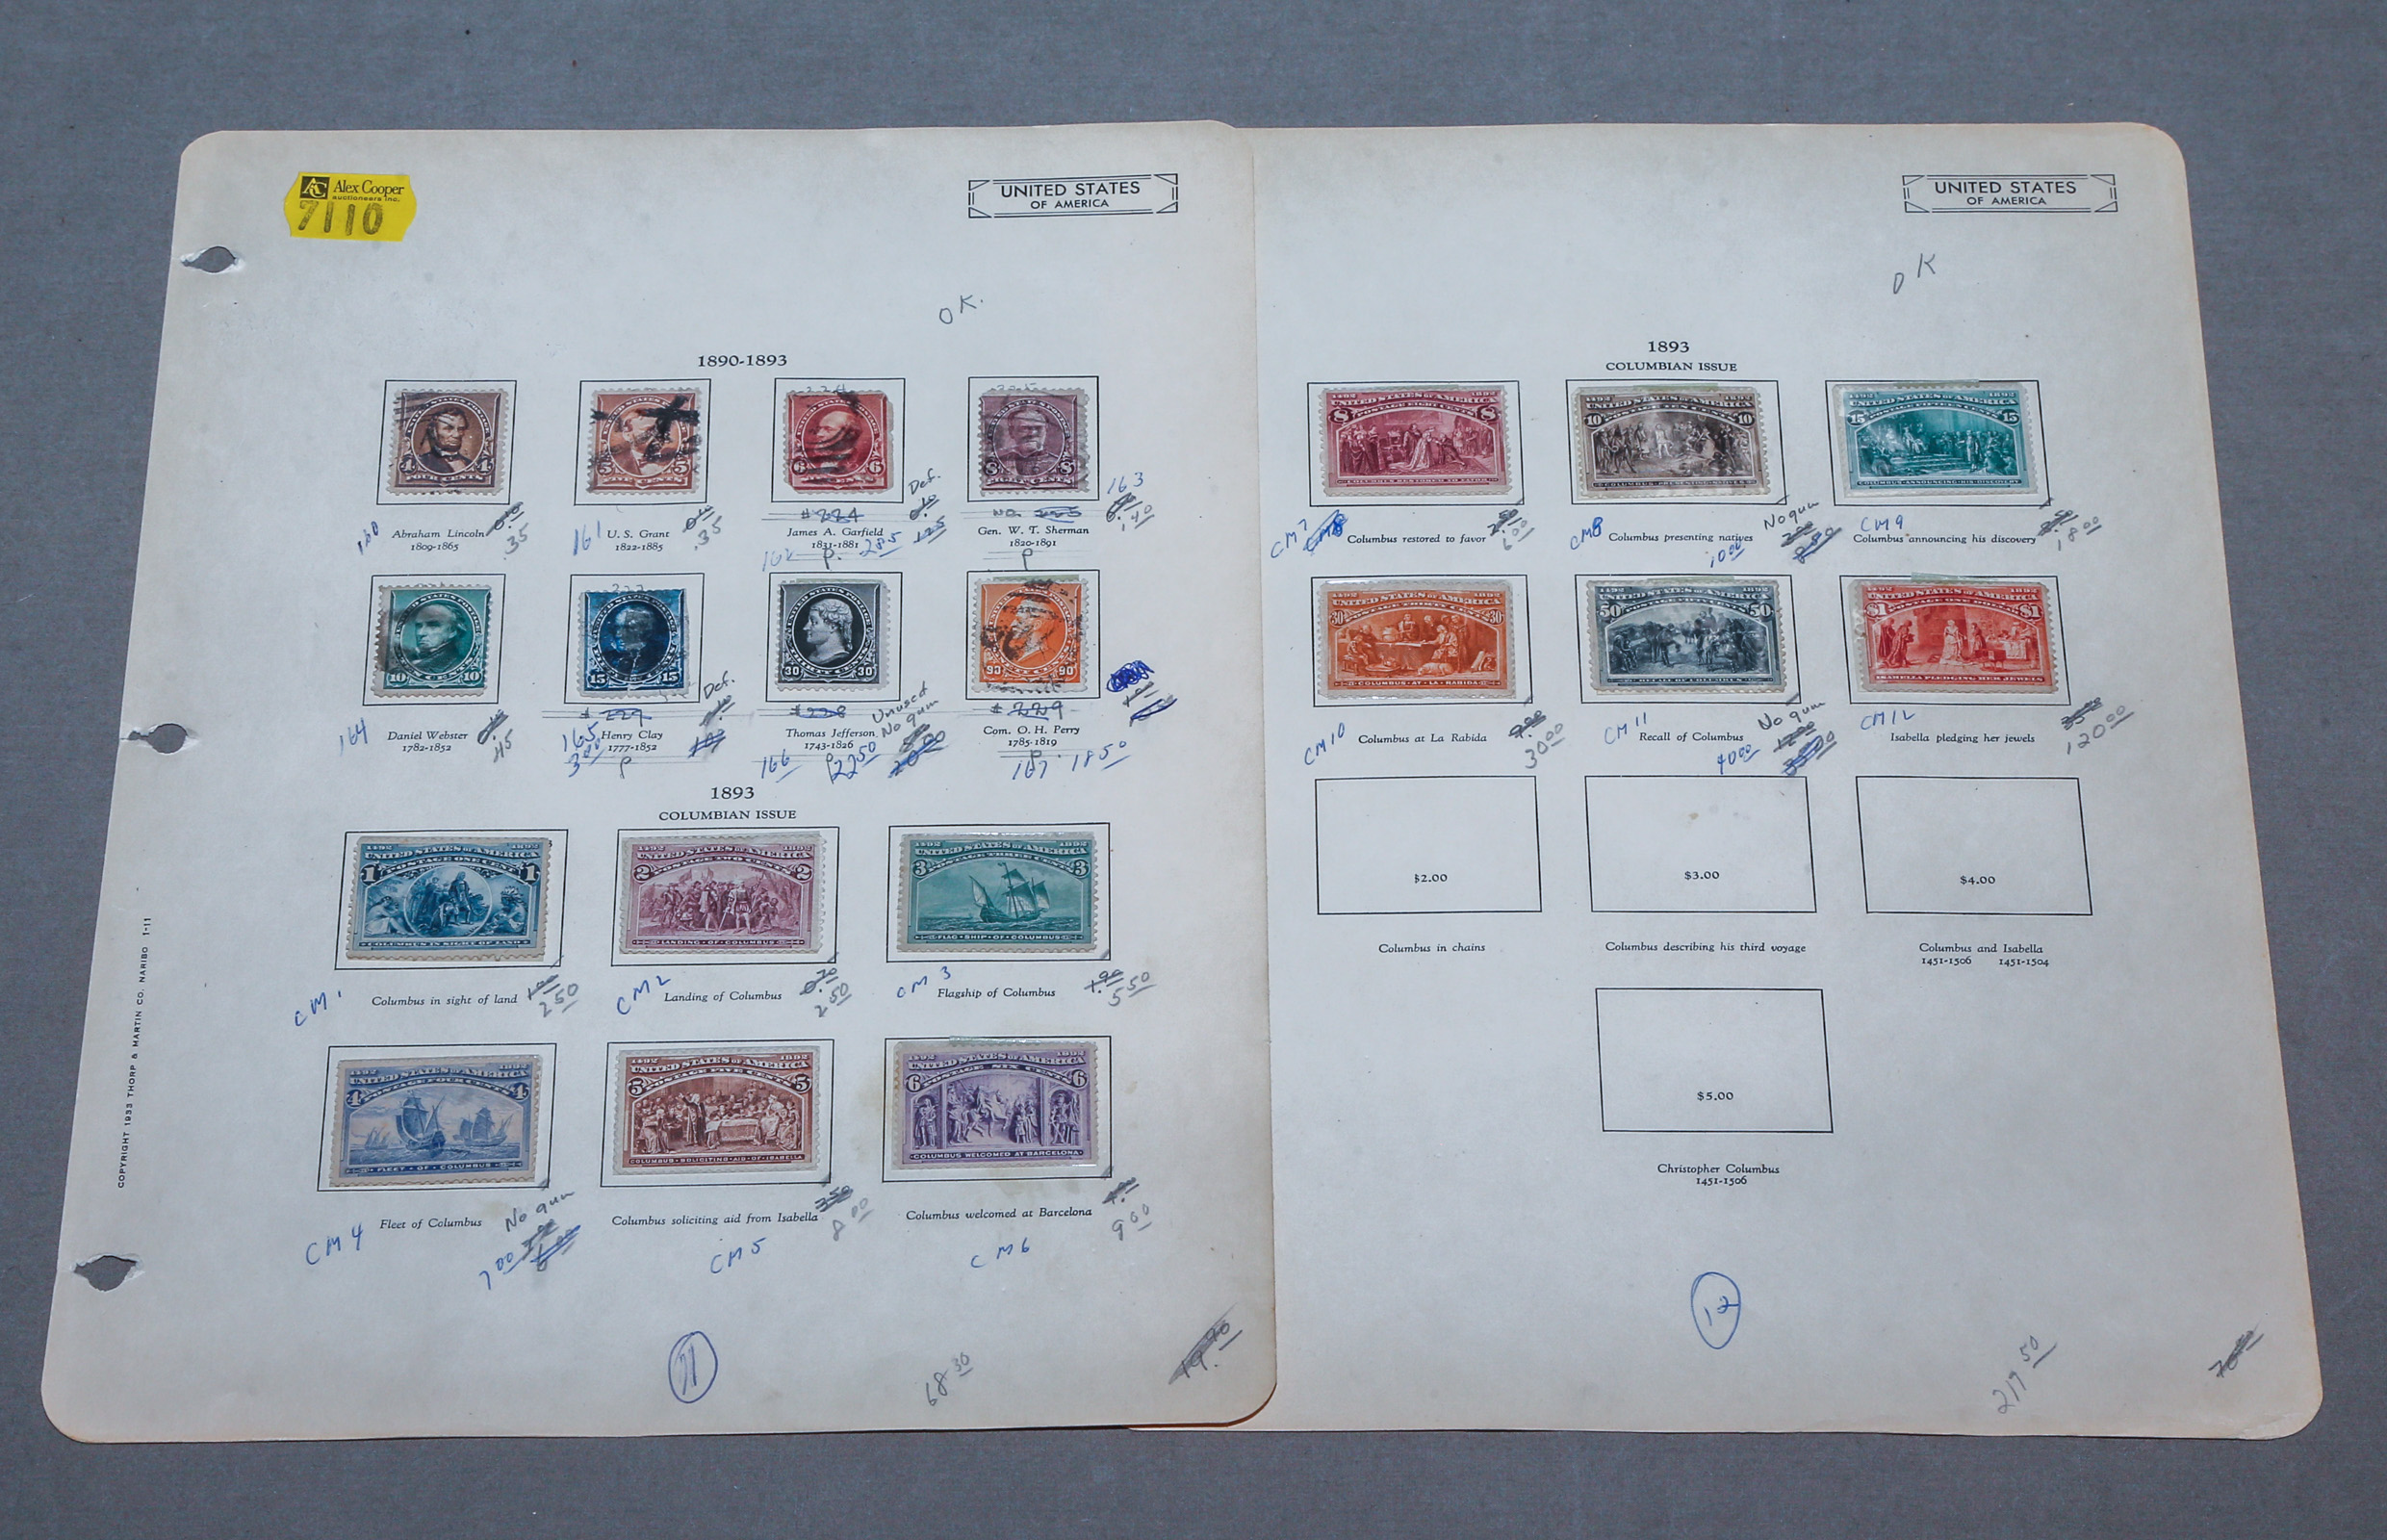 CLASSIC U S POSTAGE STAMPS 1890 93 3b2a7d